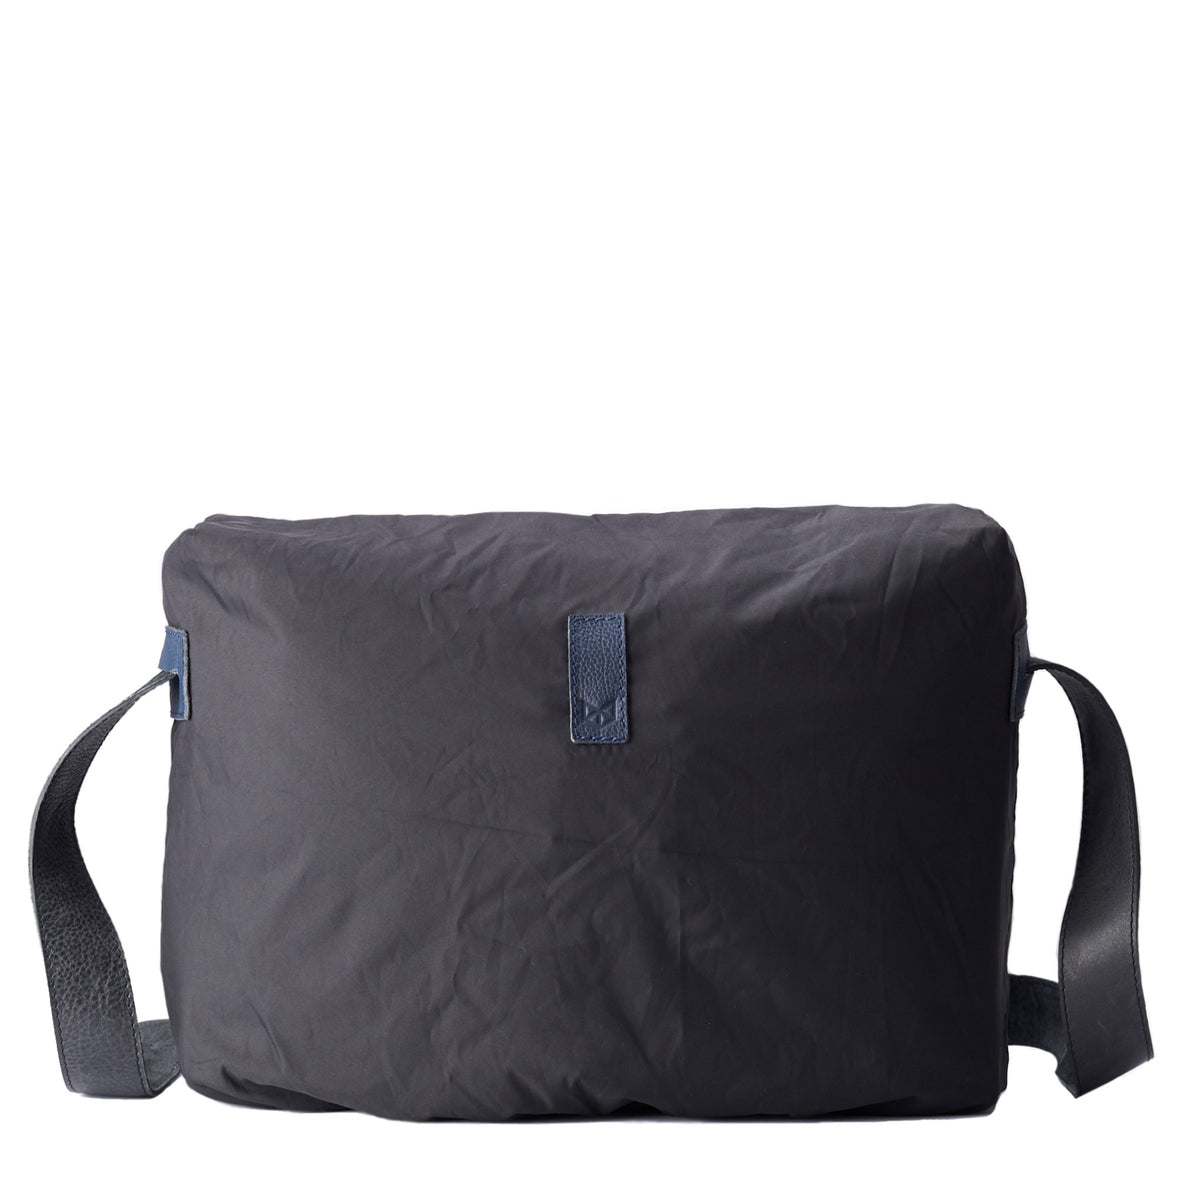 Front rain cover . Black rain cover perfect fit for all Capra messenger bags. Fashionable matte waterproof material. Leather details by Capra Leather.